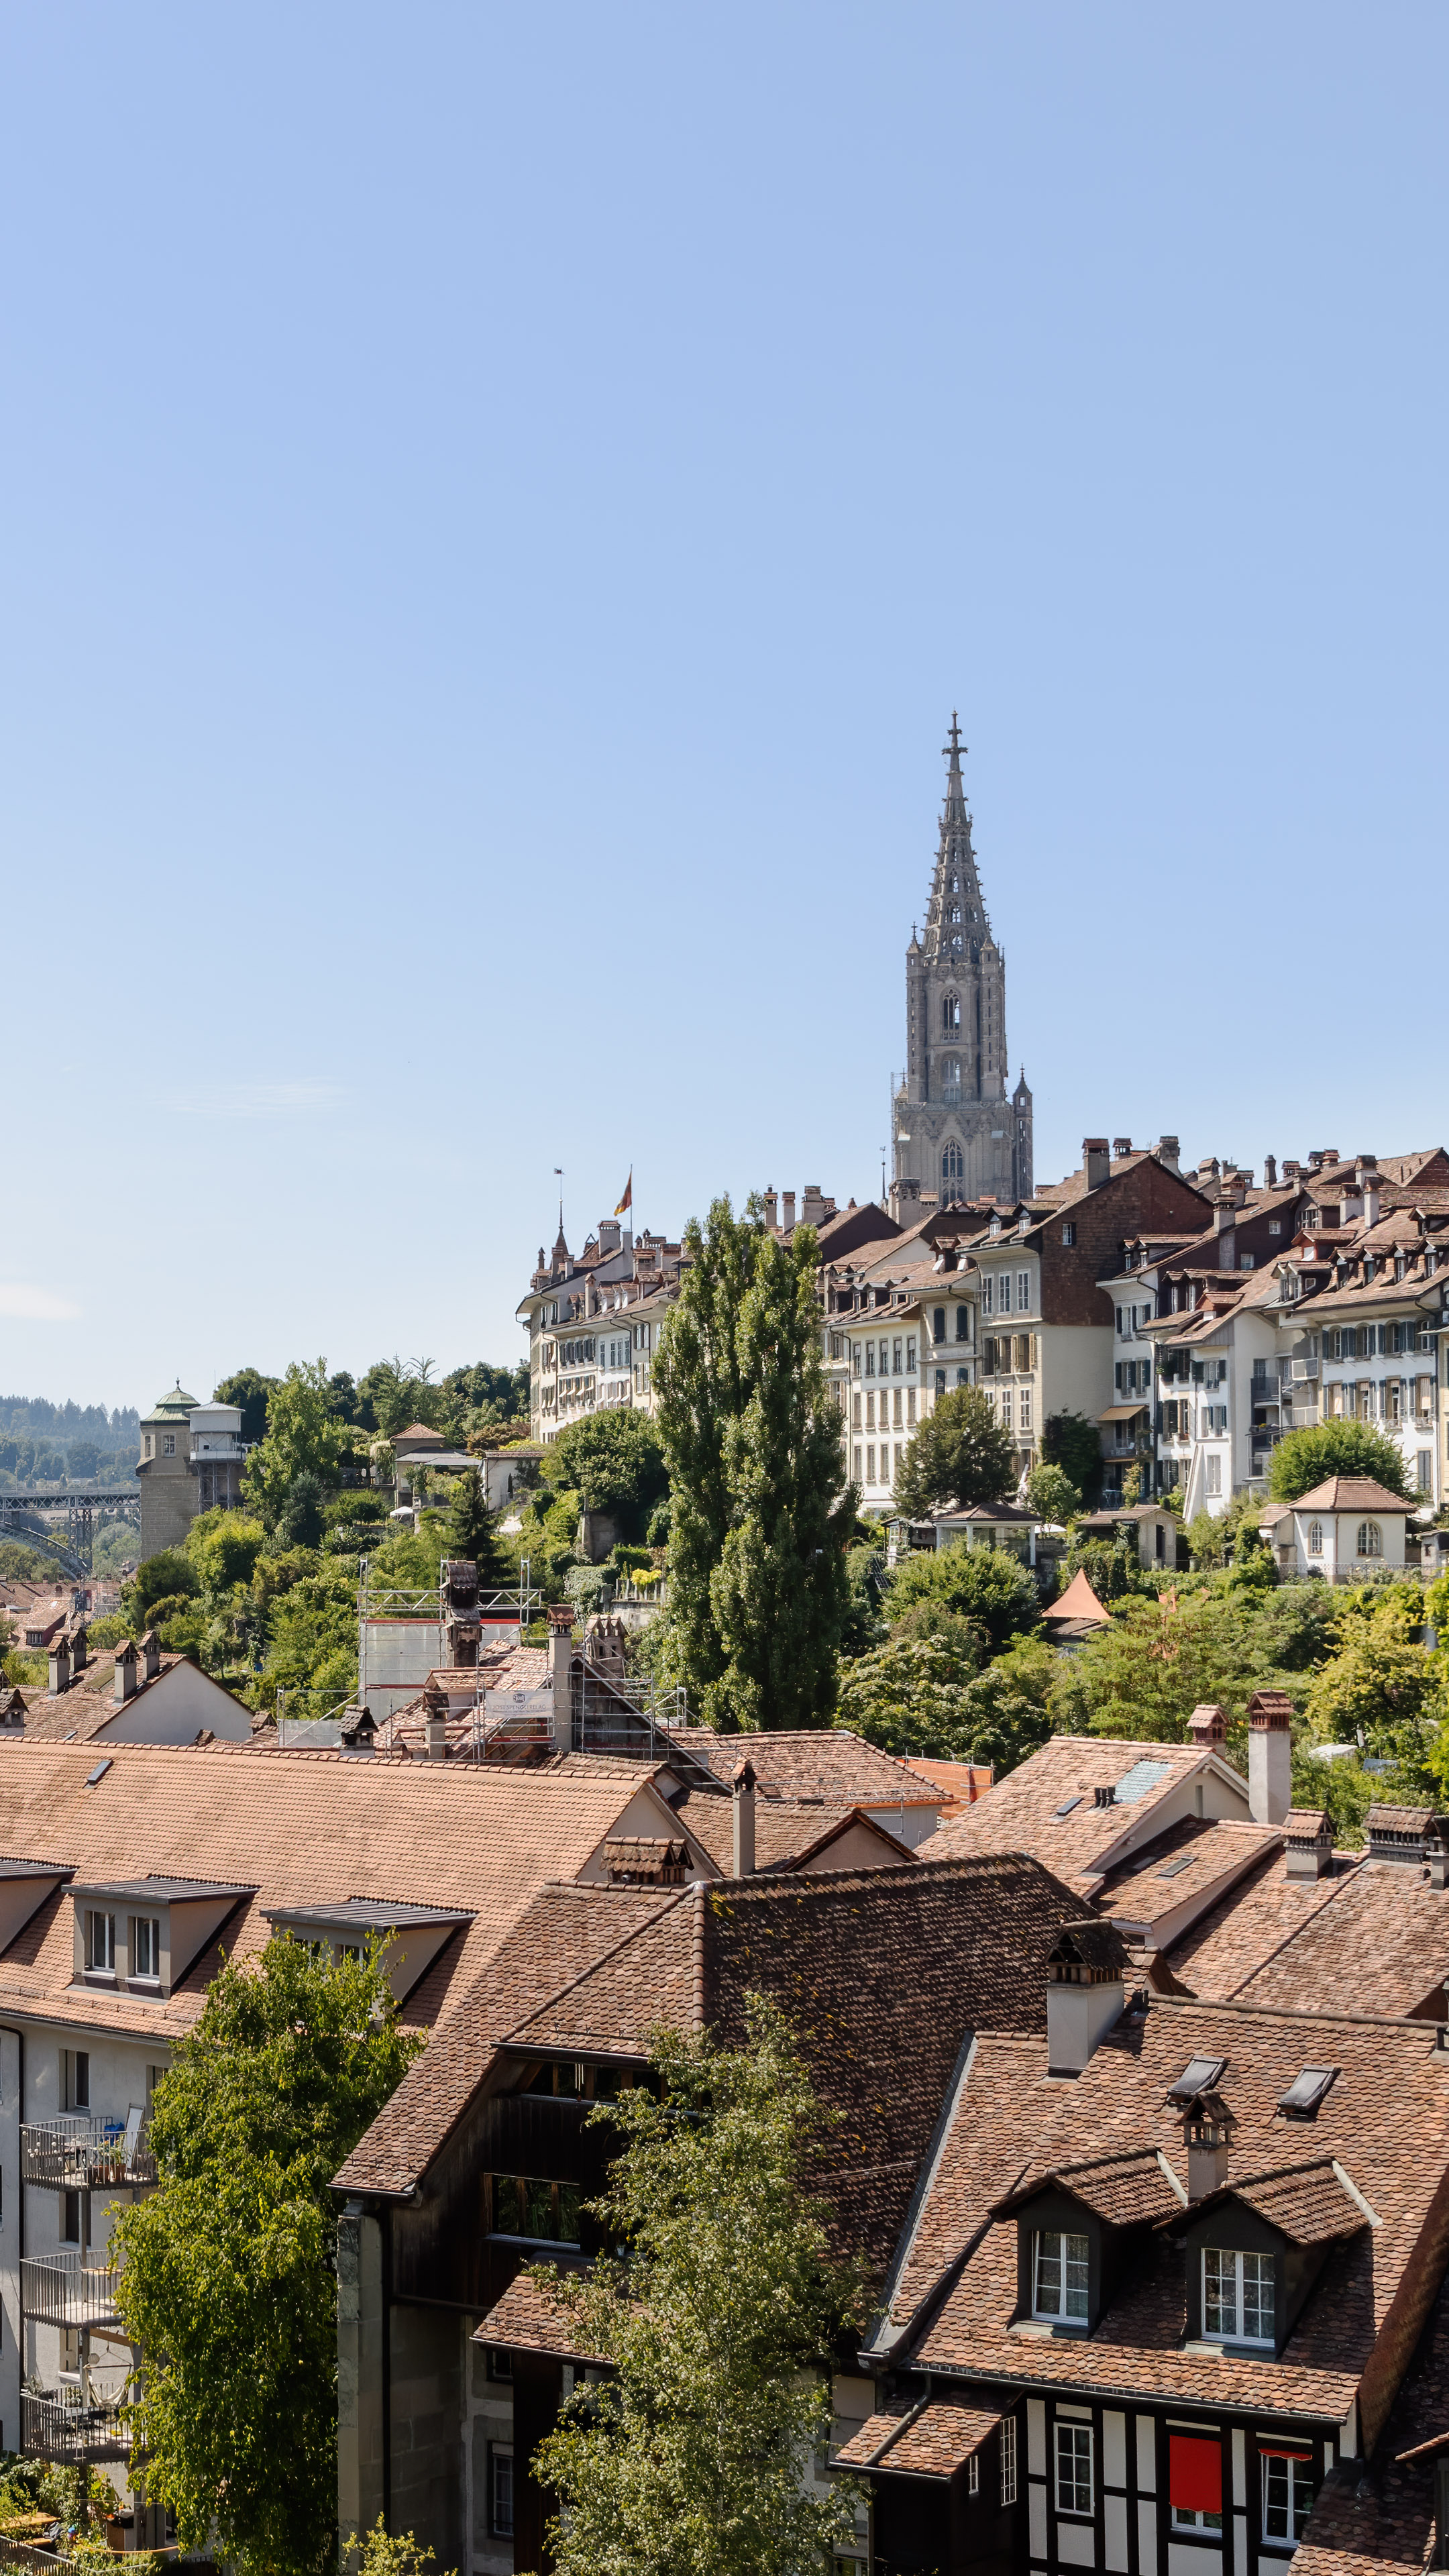 Get mesmerized by the stunning views of Bern with this high-quality cityscape wallpaper. Perfect for your desktop or phone background.